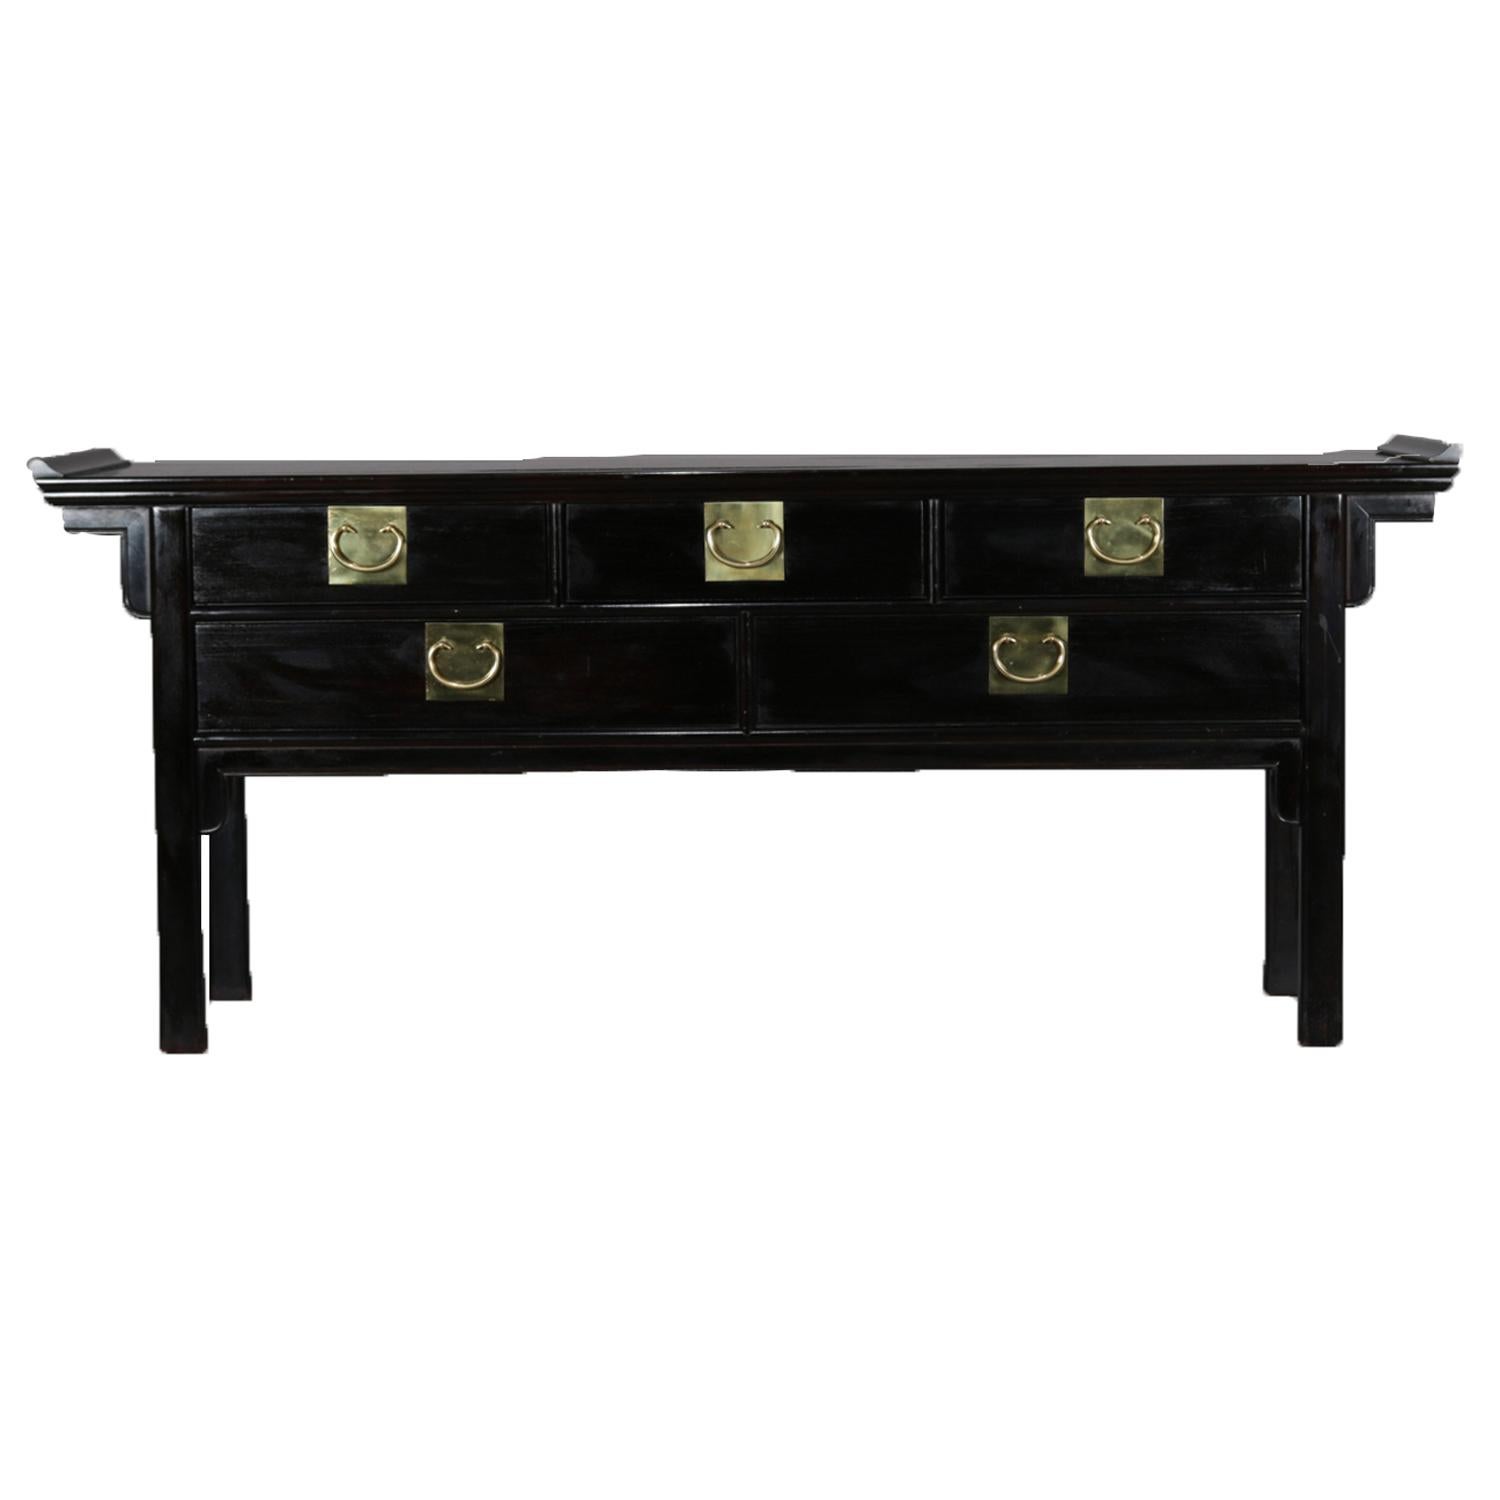 An antique chinoiserie server by Century featuring ebonized finish in stylized pagoda form and having three smaller drawers over two larger drawers with c-scroll brass hardware, original century maker label within drawer, circa 1890.

Measures: